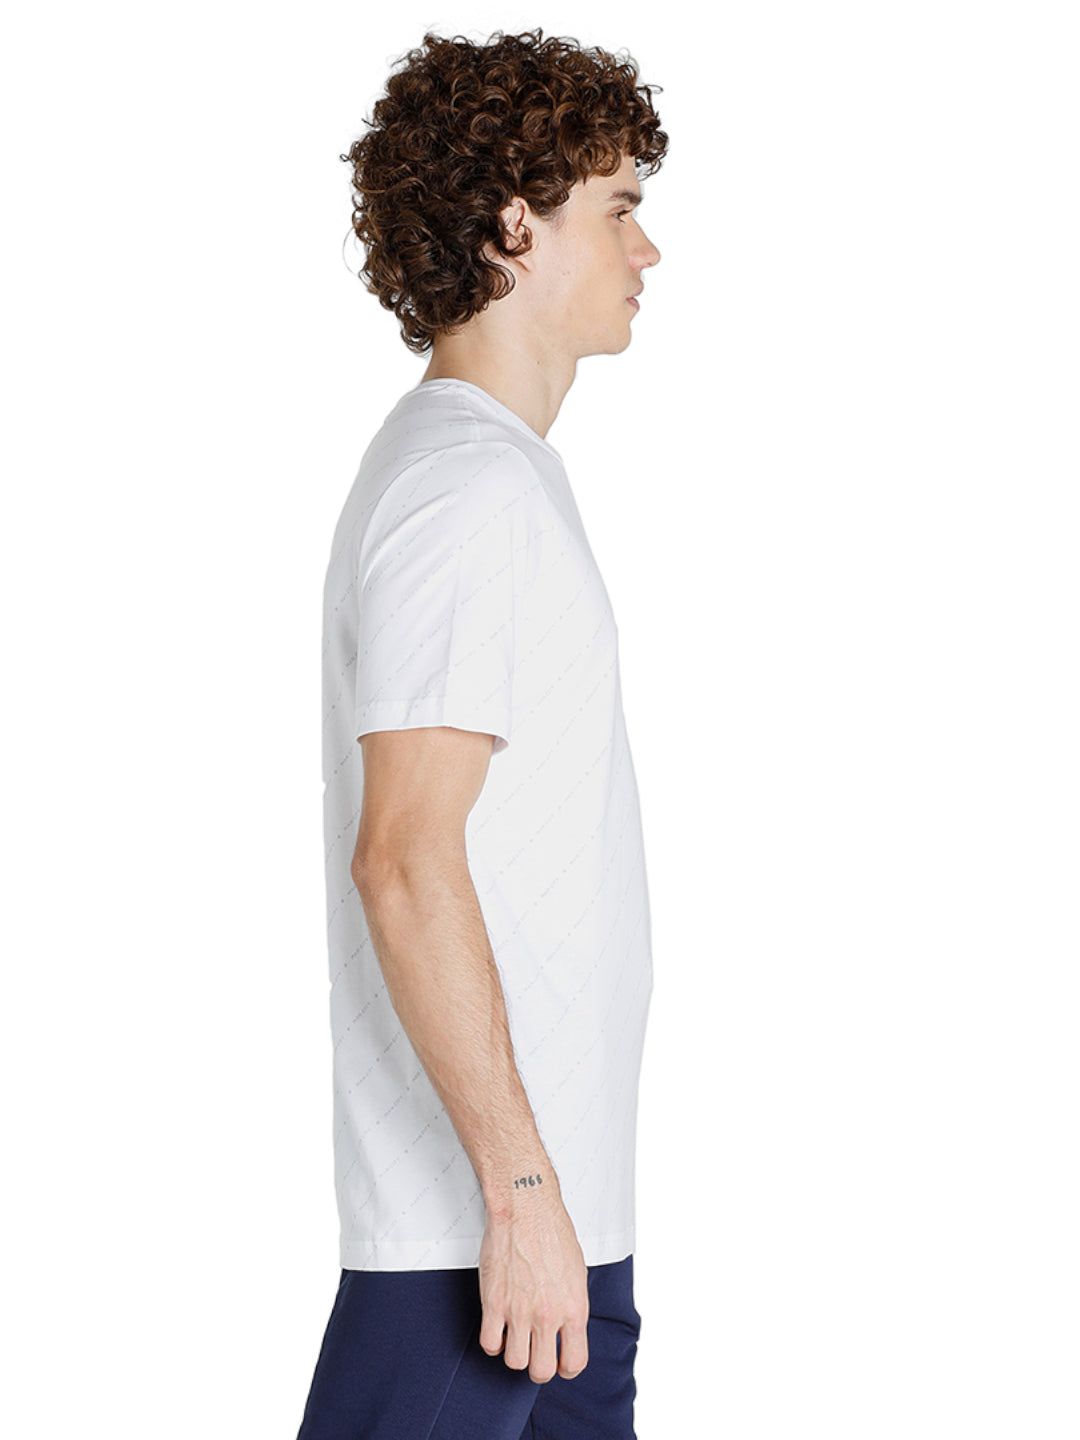 Men White Blue Printed Round Neck Crest T-Shirt From Fancode Shop.